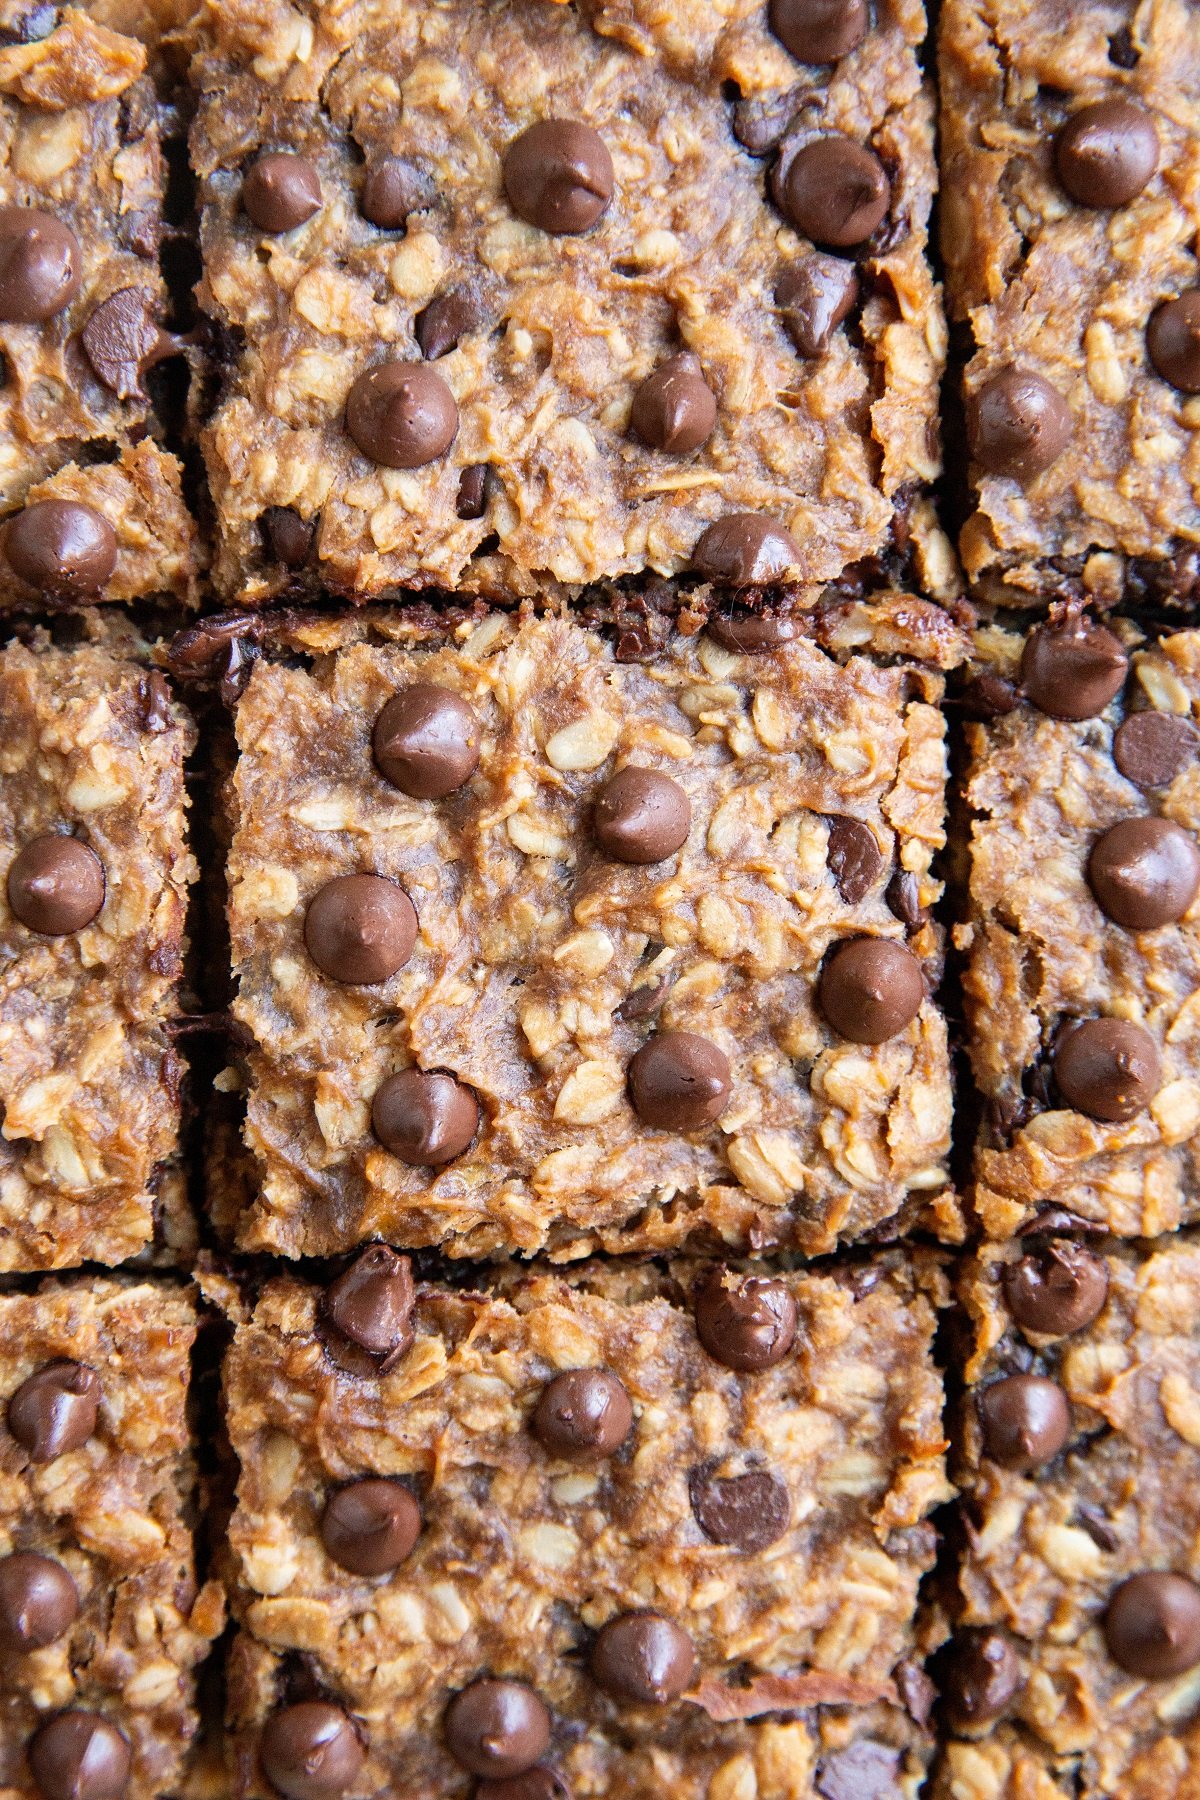 Slices of peanut butter chocolate chip banana oatmeal bars on a sheet of parchment paper.